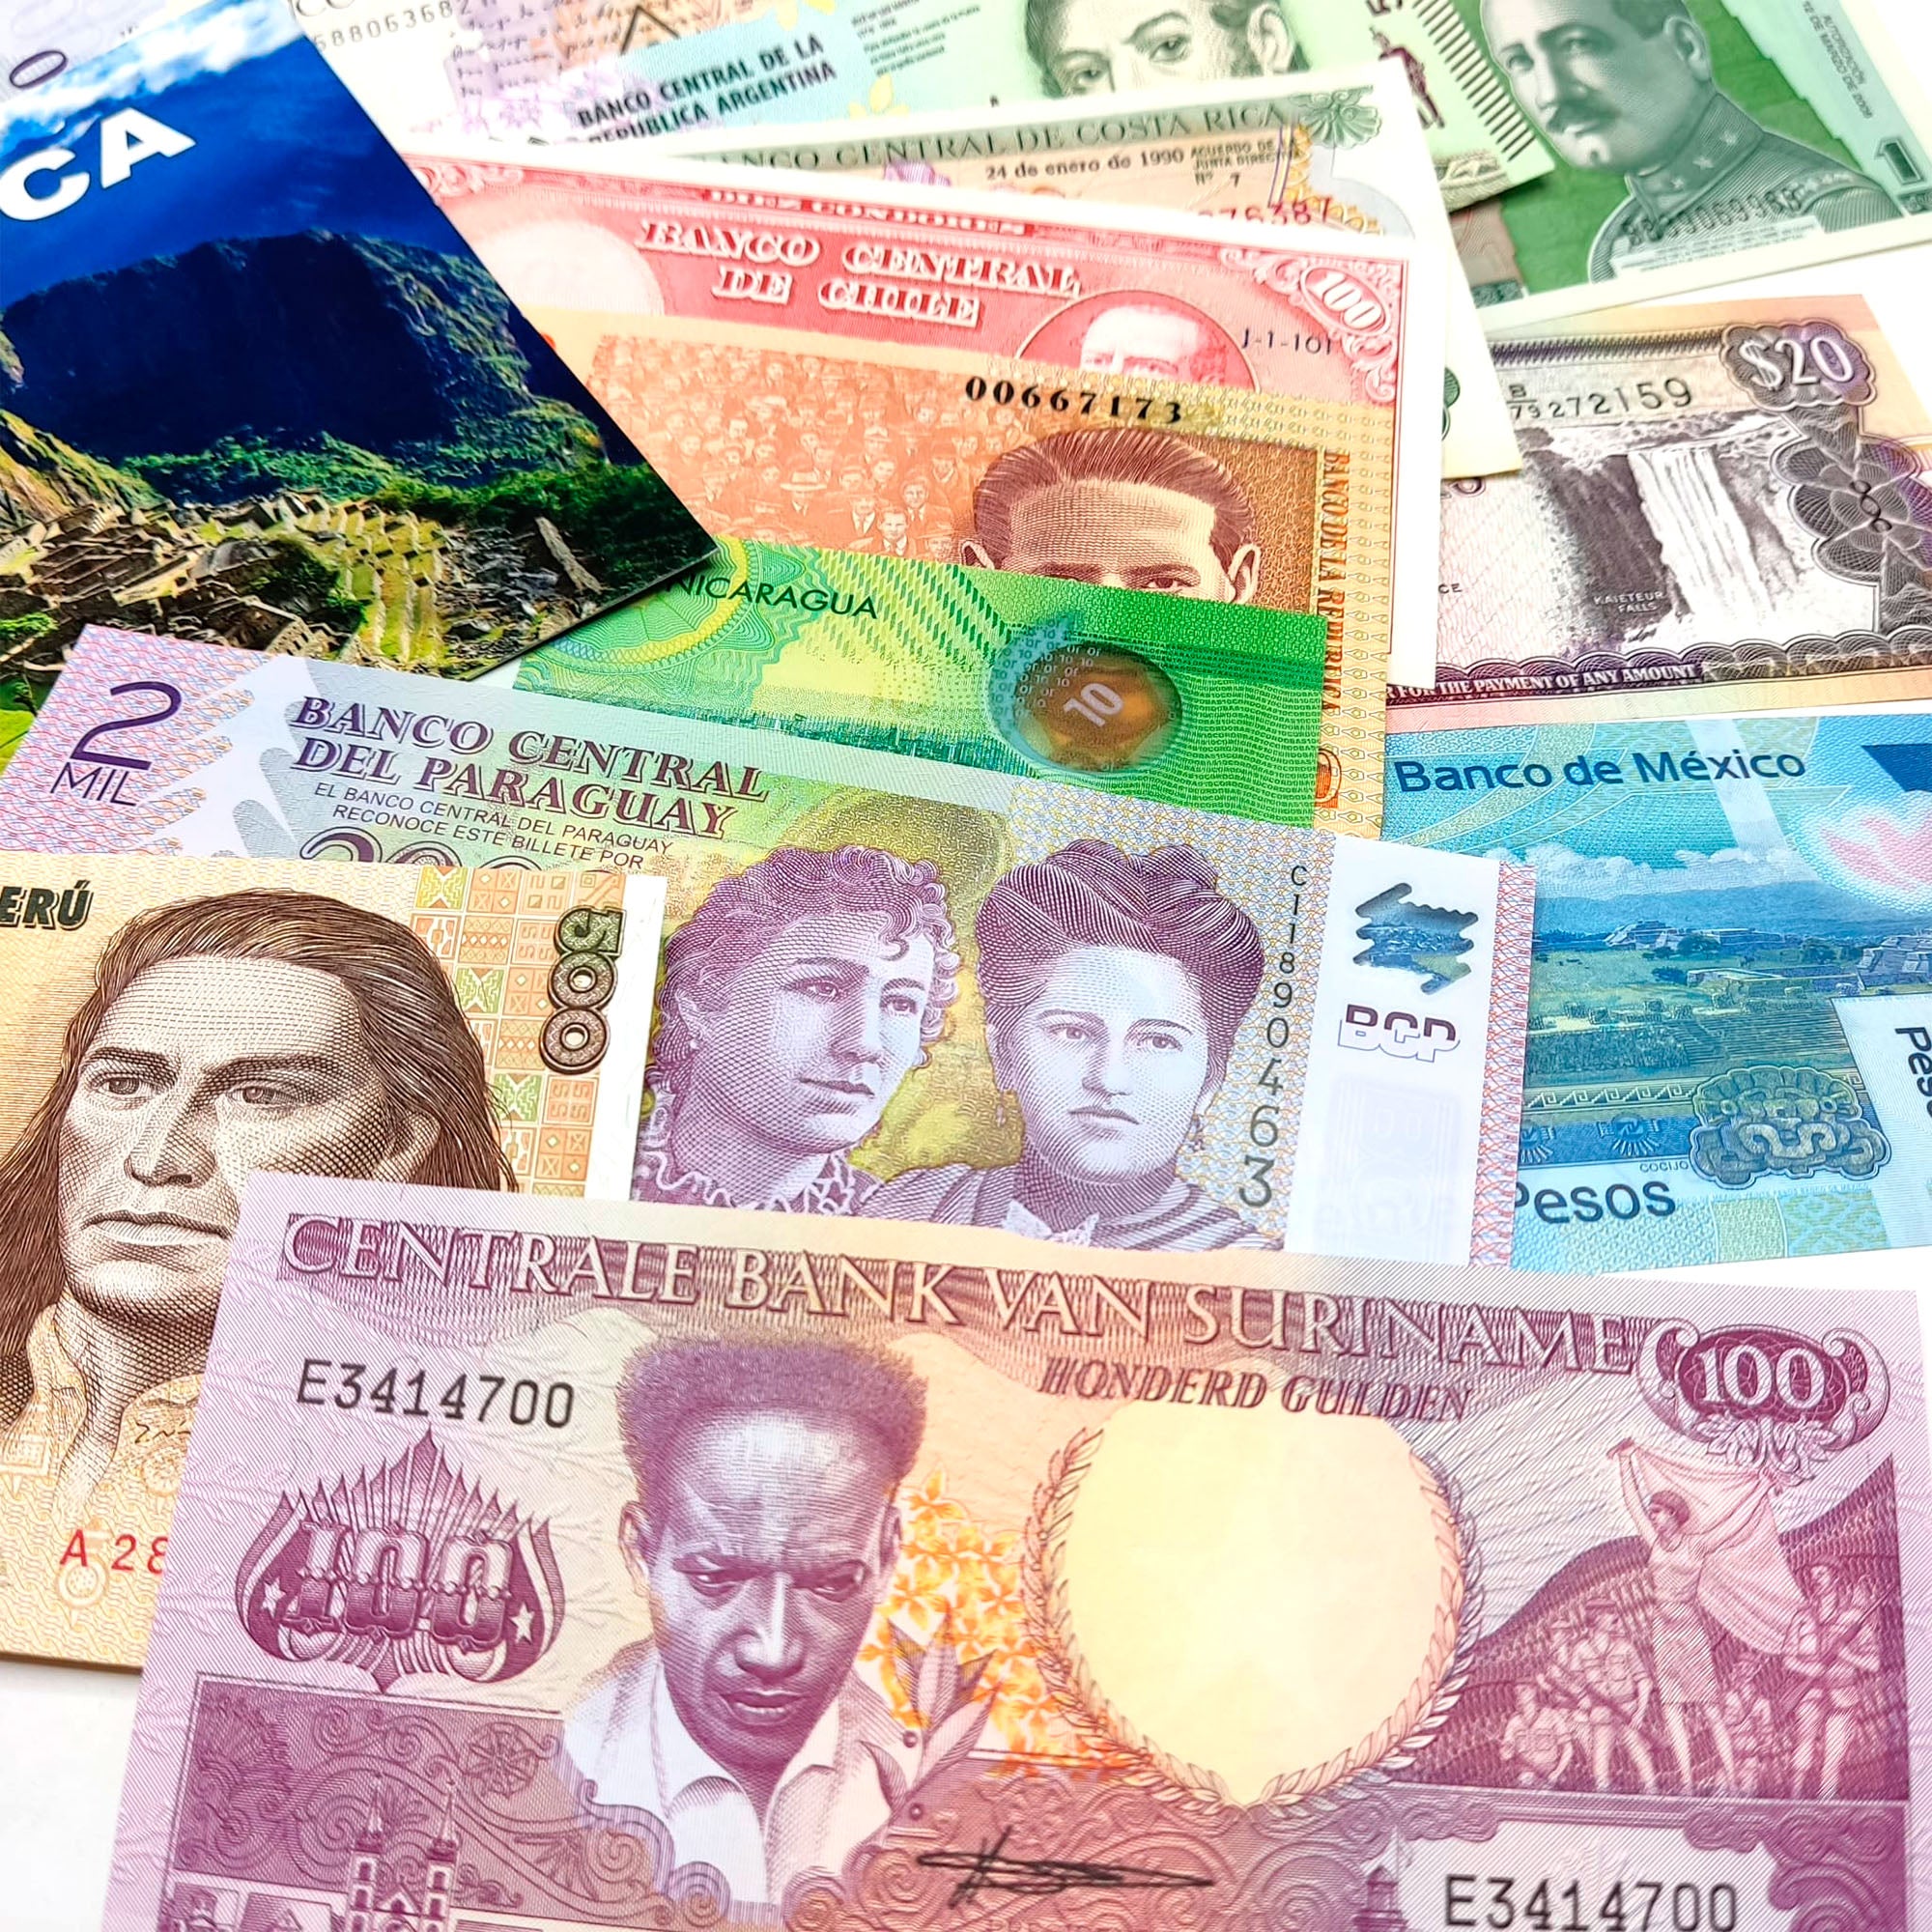 World Paper Money - 15 Banknotes from Latin America